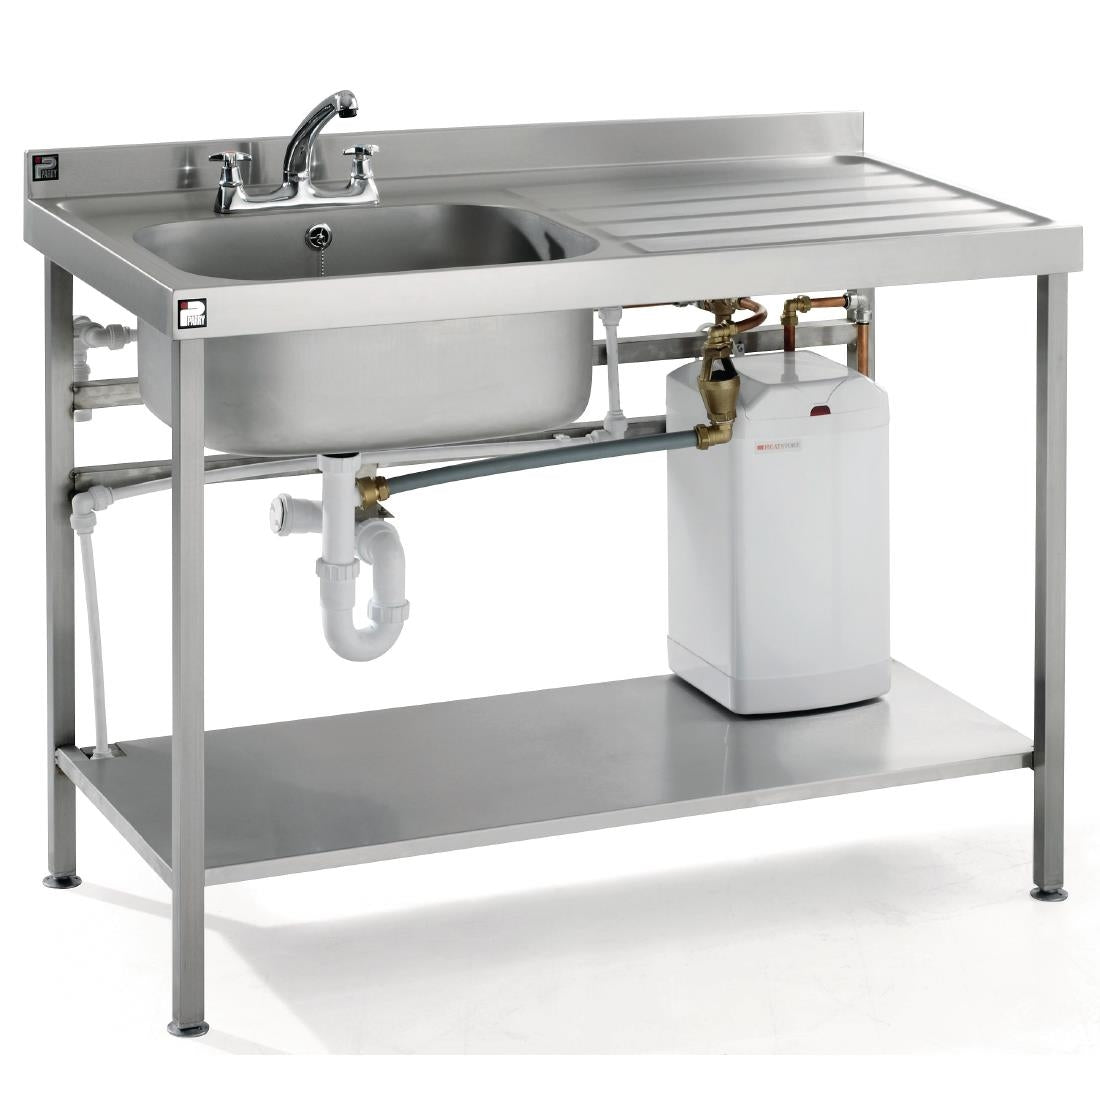 Parry Stainless Steel Fully Assembled Sink Right Hand Drainer 1200mm With boiler